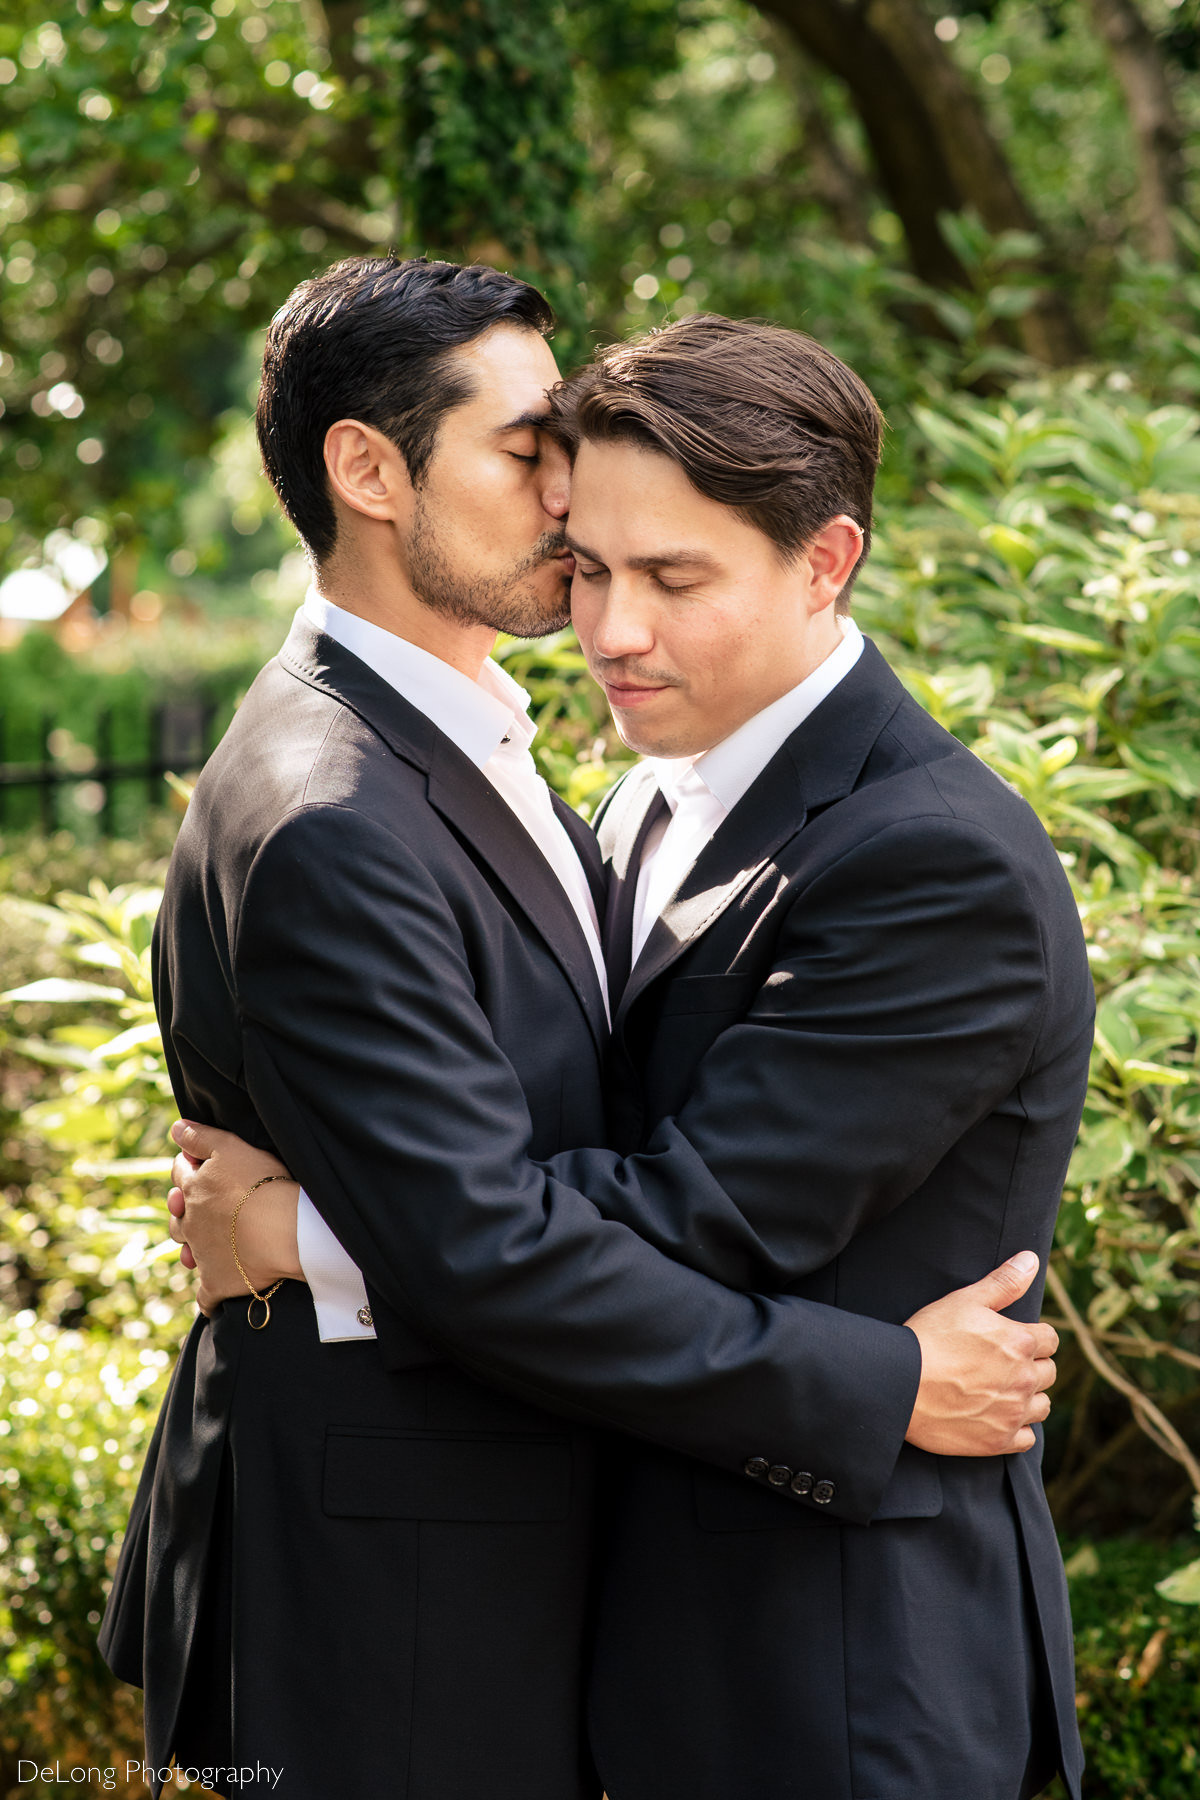 Sweet portrait of a groom receiving a kiss from his husband gentle smiling with his eyes closed at the Duke Mansion by Charlotte wedding photographers DeLong Photography